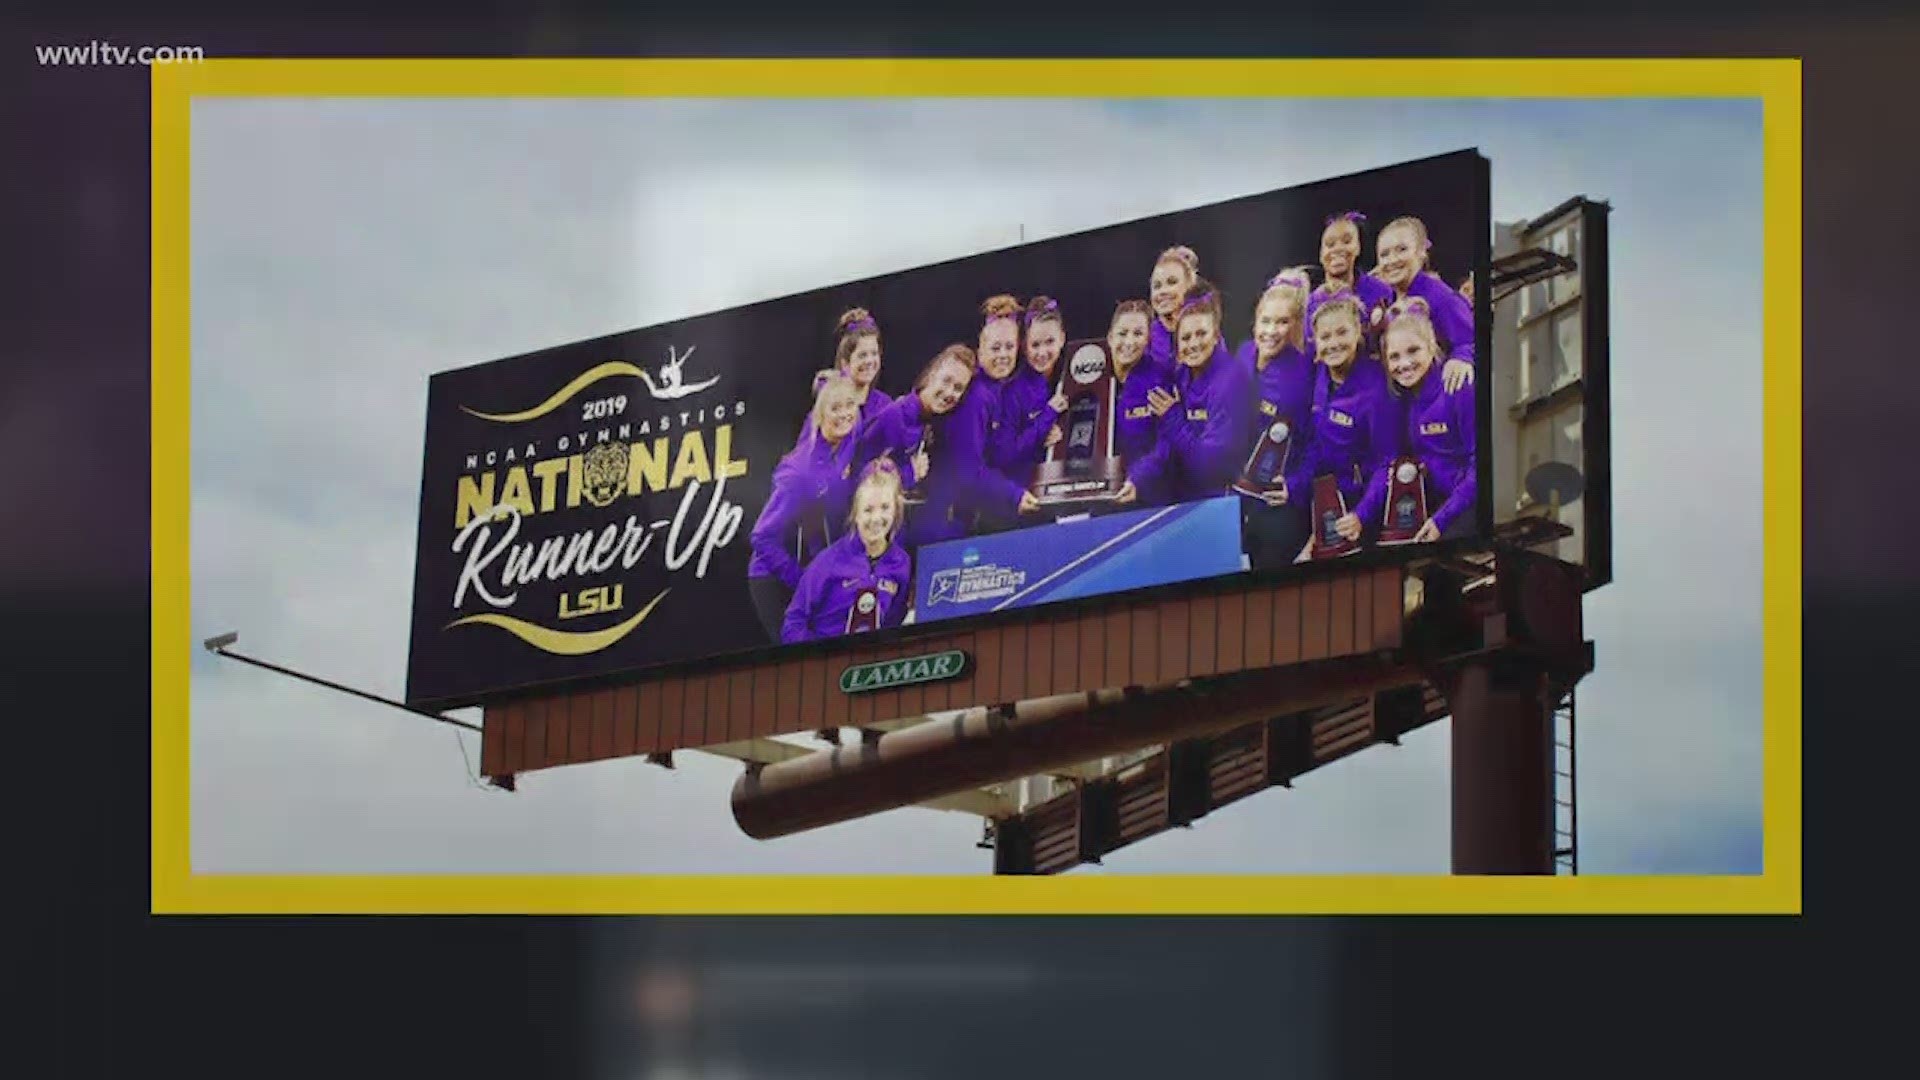 Sports Darren Rovell was not happy that LSU put up a billboard congratulating the Tigers gymnastics team on a second-place finish.  That didn't go over too well with LSU faithful.